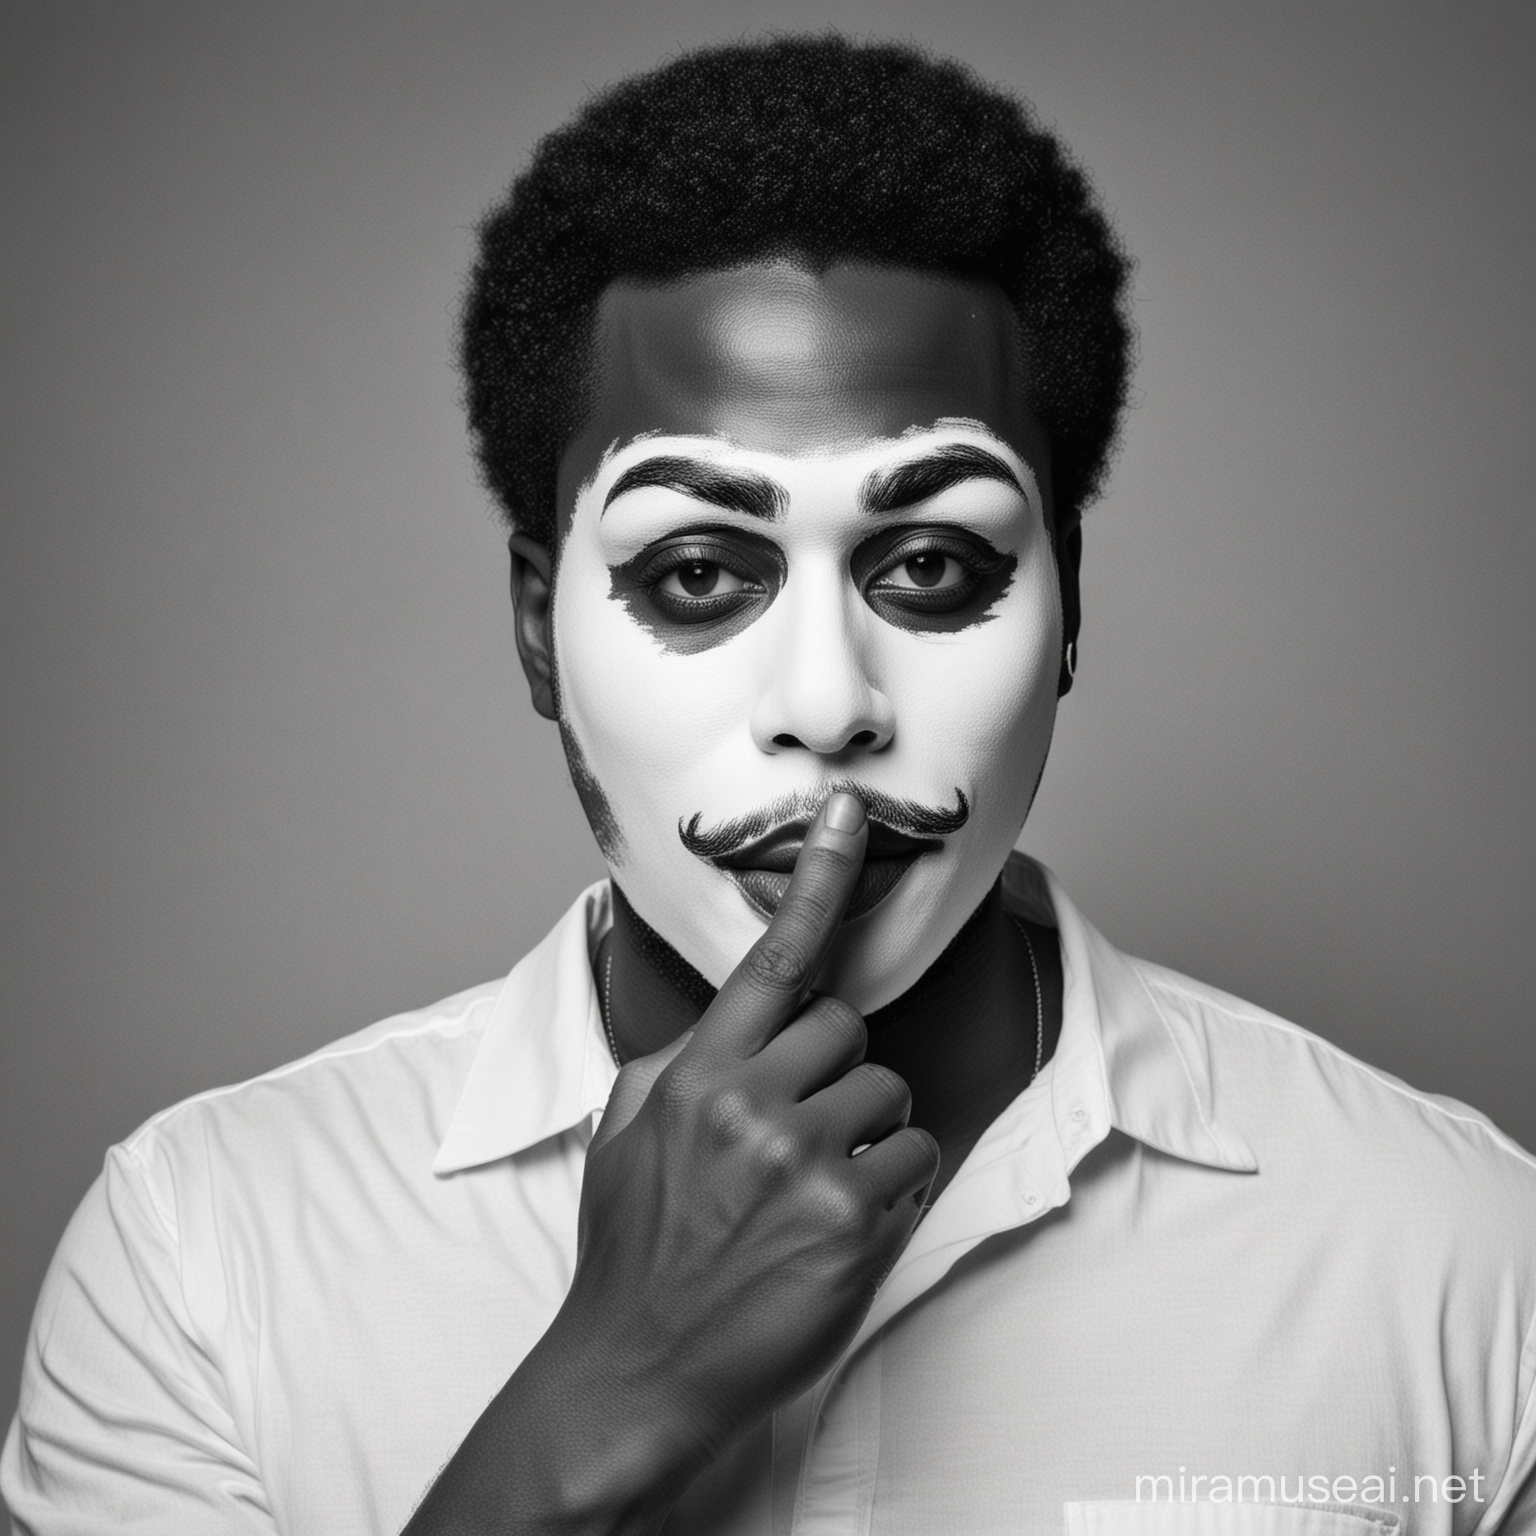 black and white image of a black man wearing a white mask putting one finger on his lips and saying be quiet
